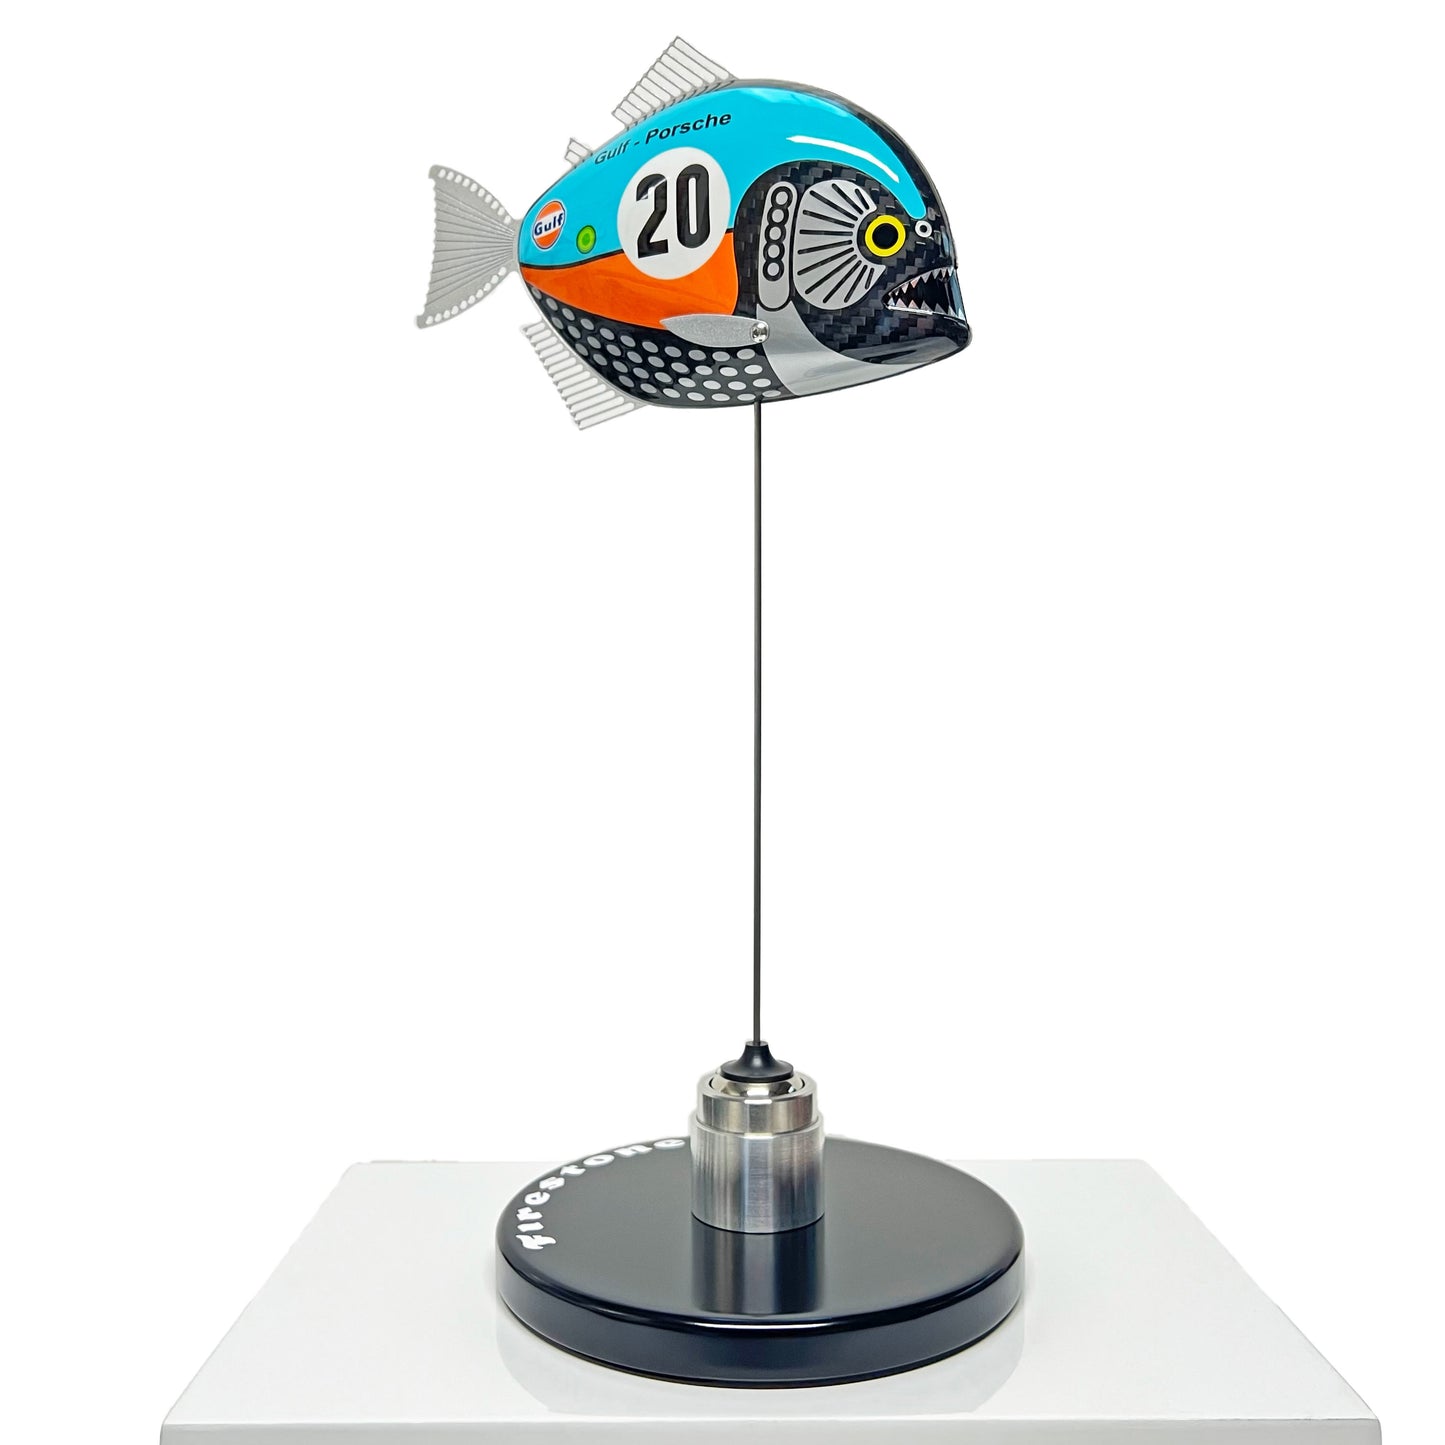 Carbon fibre piranha sculpture with Gulf Porsche Livery on a black base with F1 parts